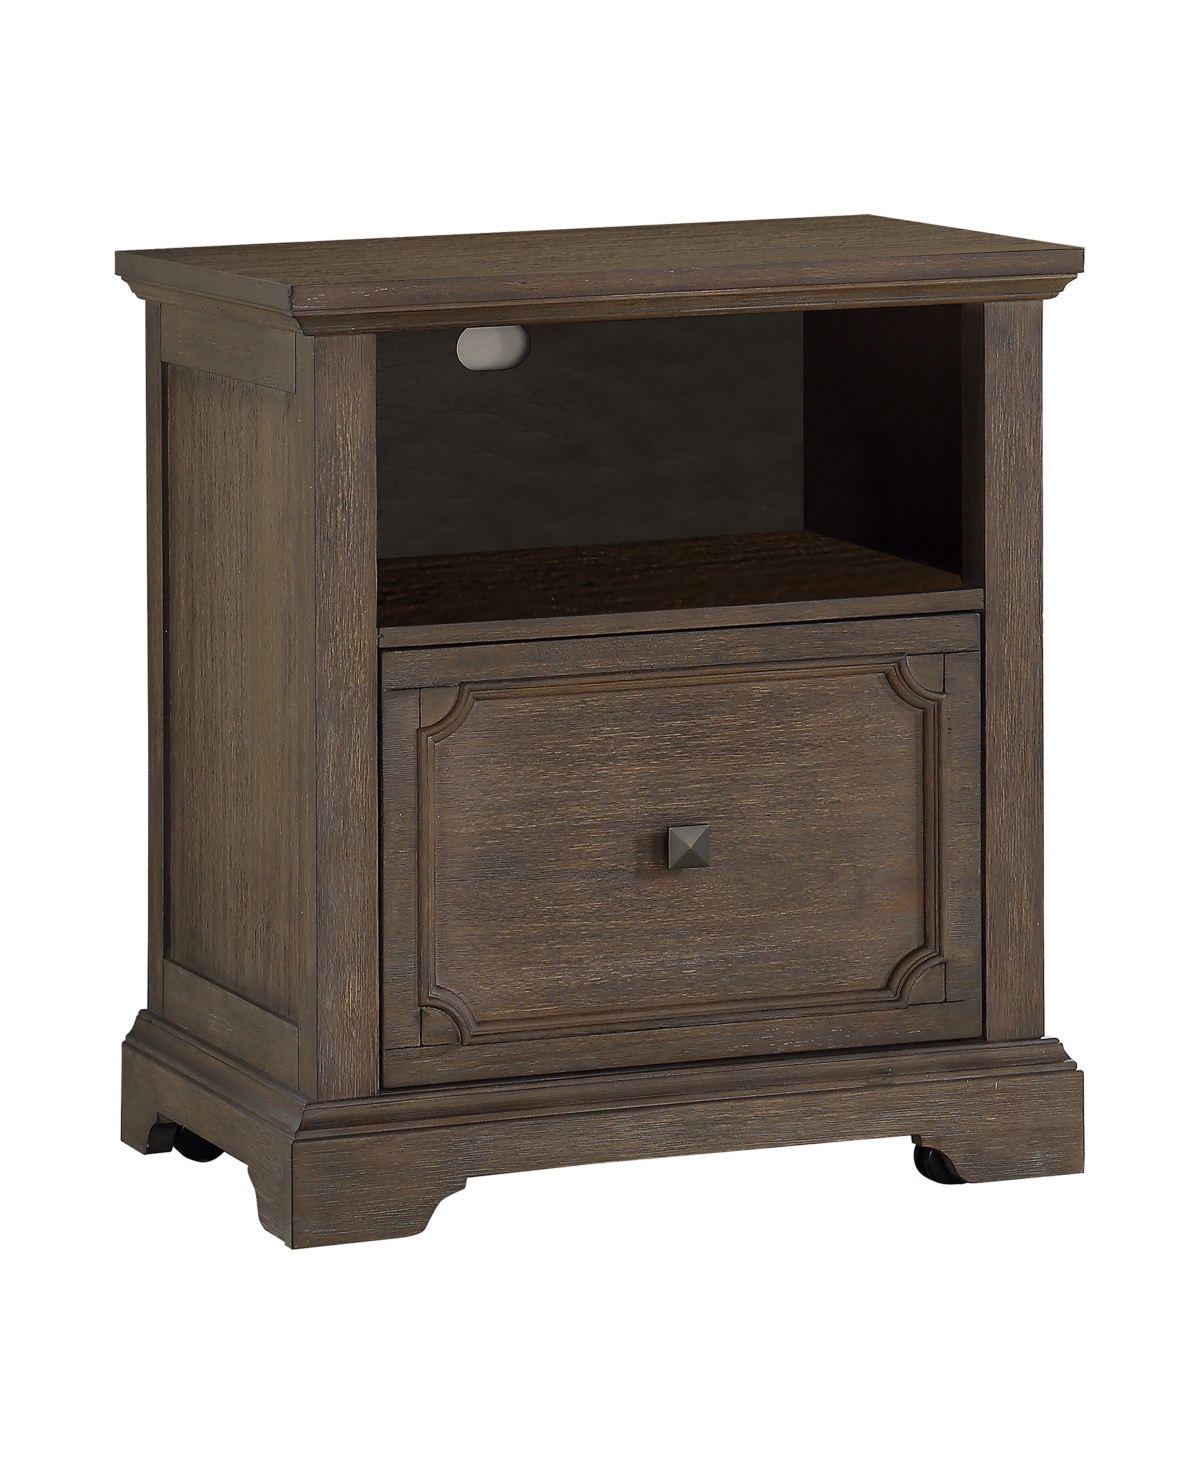 Furniture Huron Lateral File Cabinet With Casters In Distressed Dark Oak